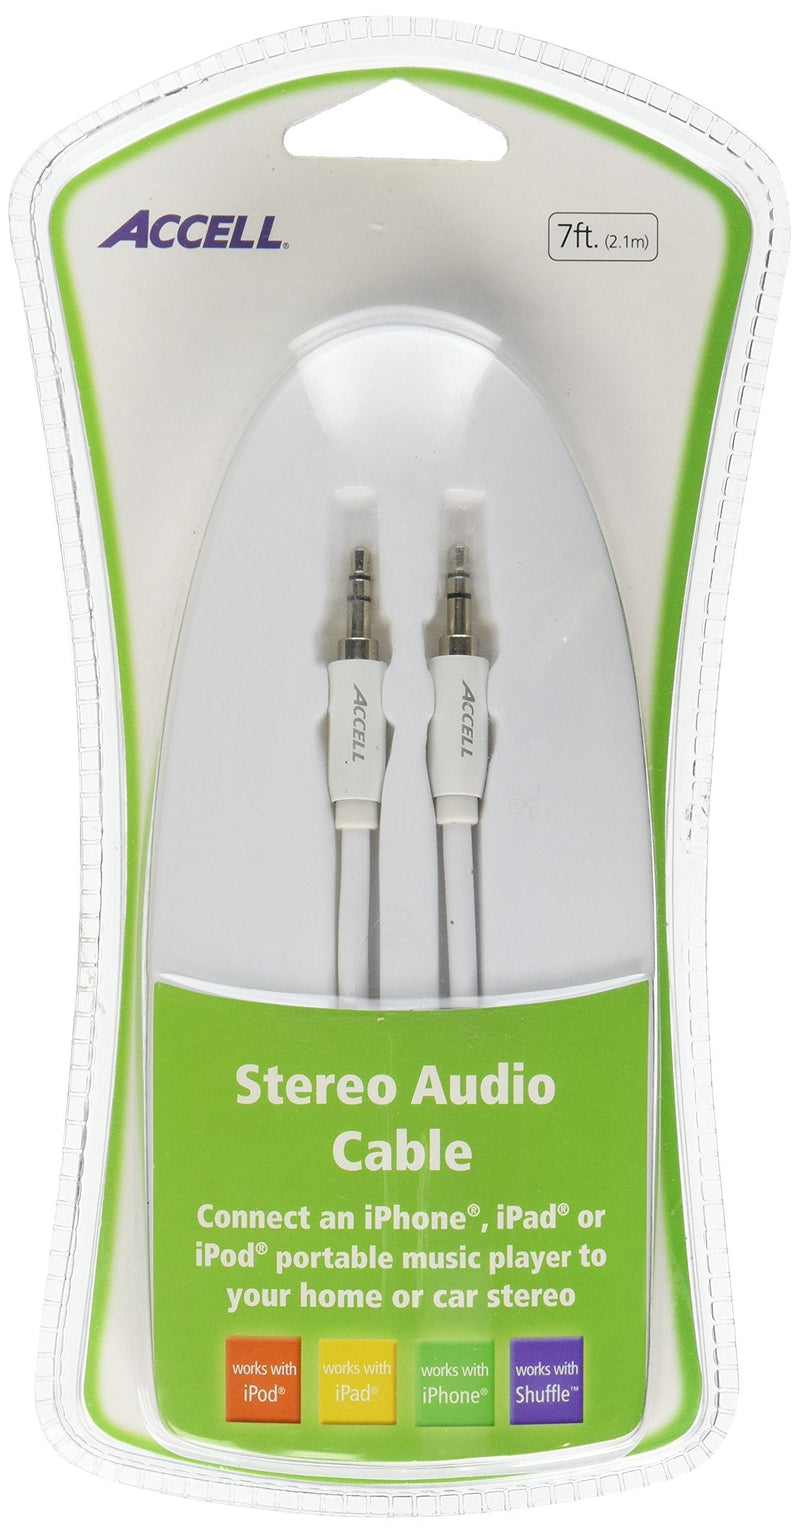 Accell 3.5mm Stereo Audio Cable - 7 Feet, White, 3.5mm (Male) to 3.5mm (Male)